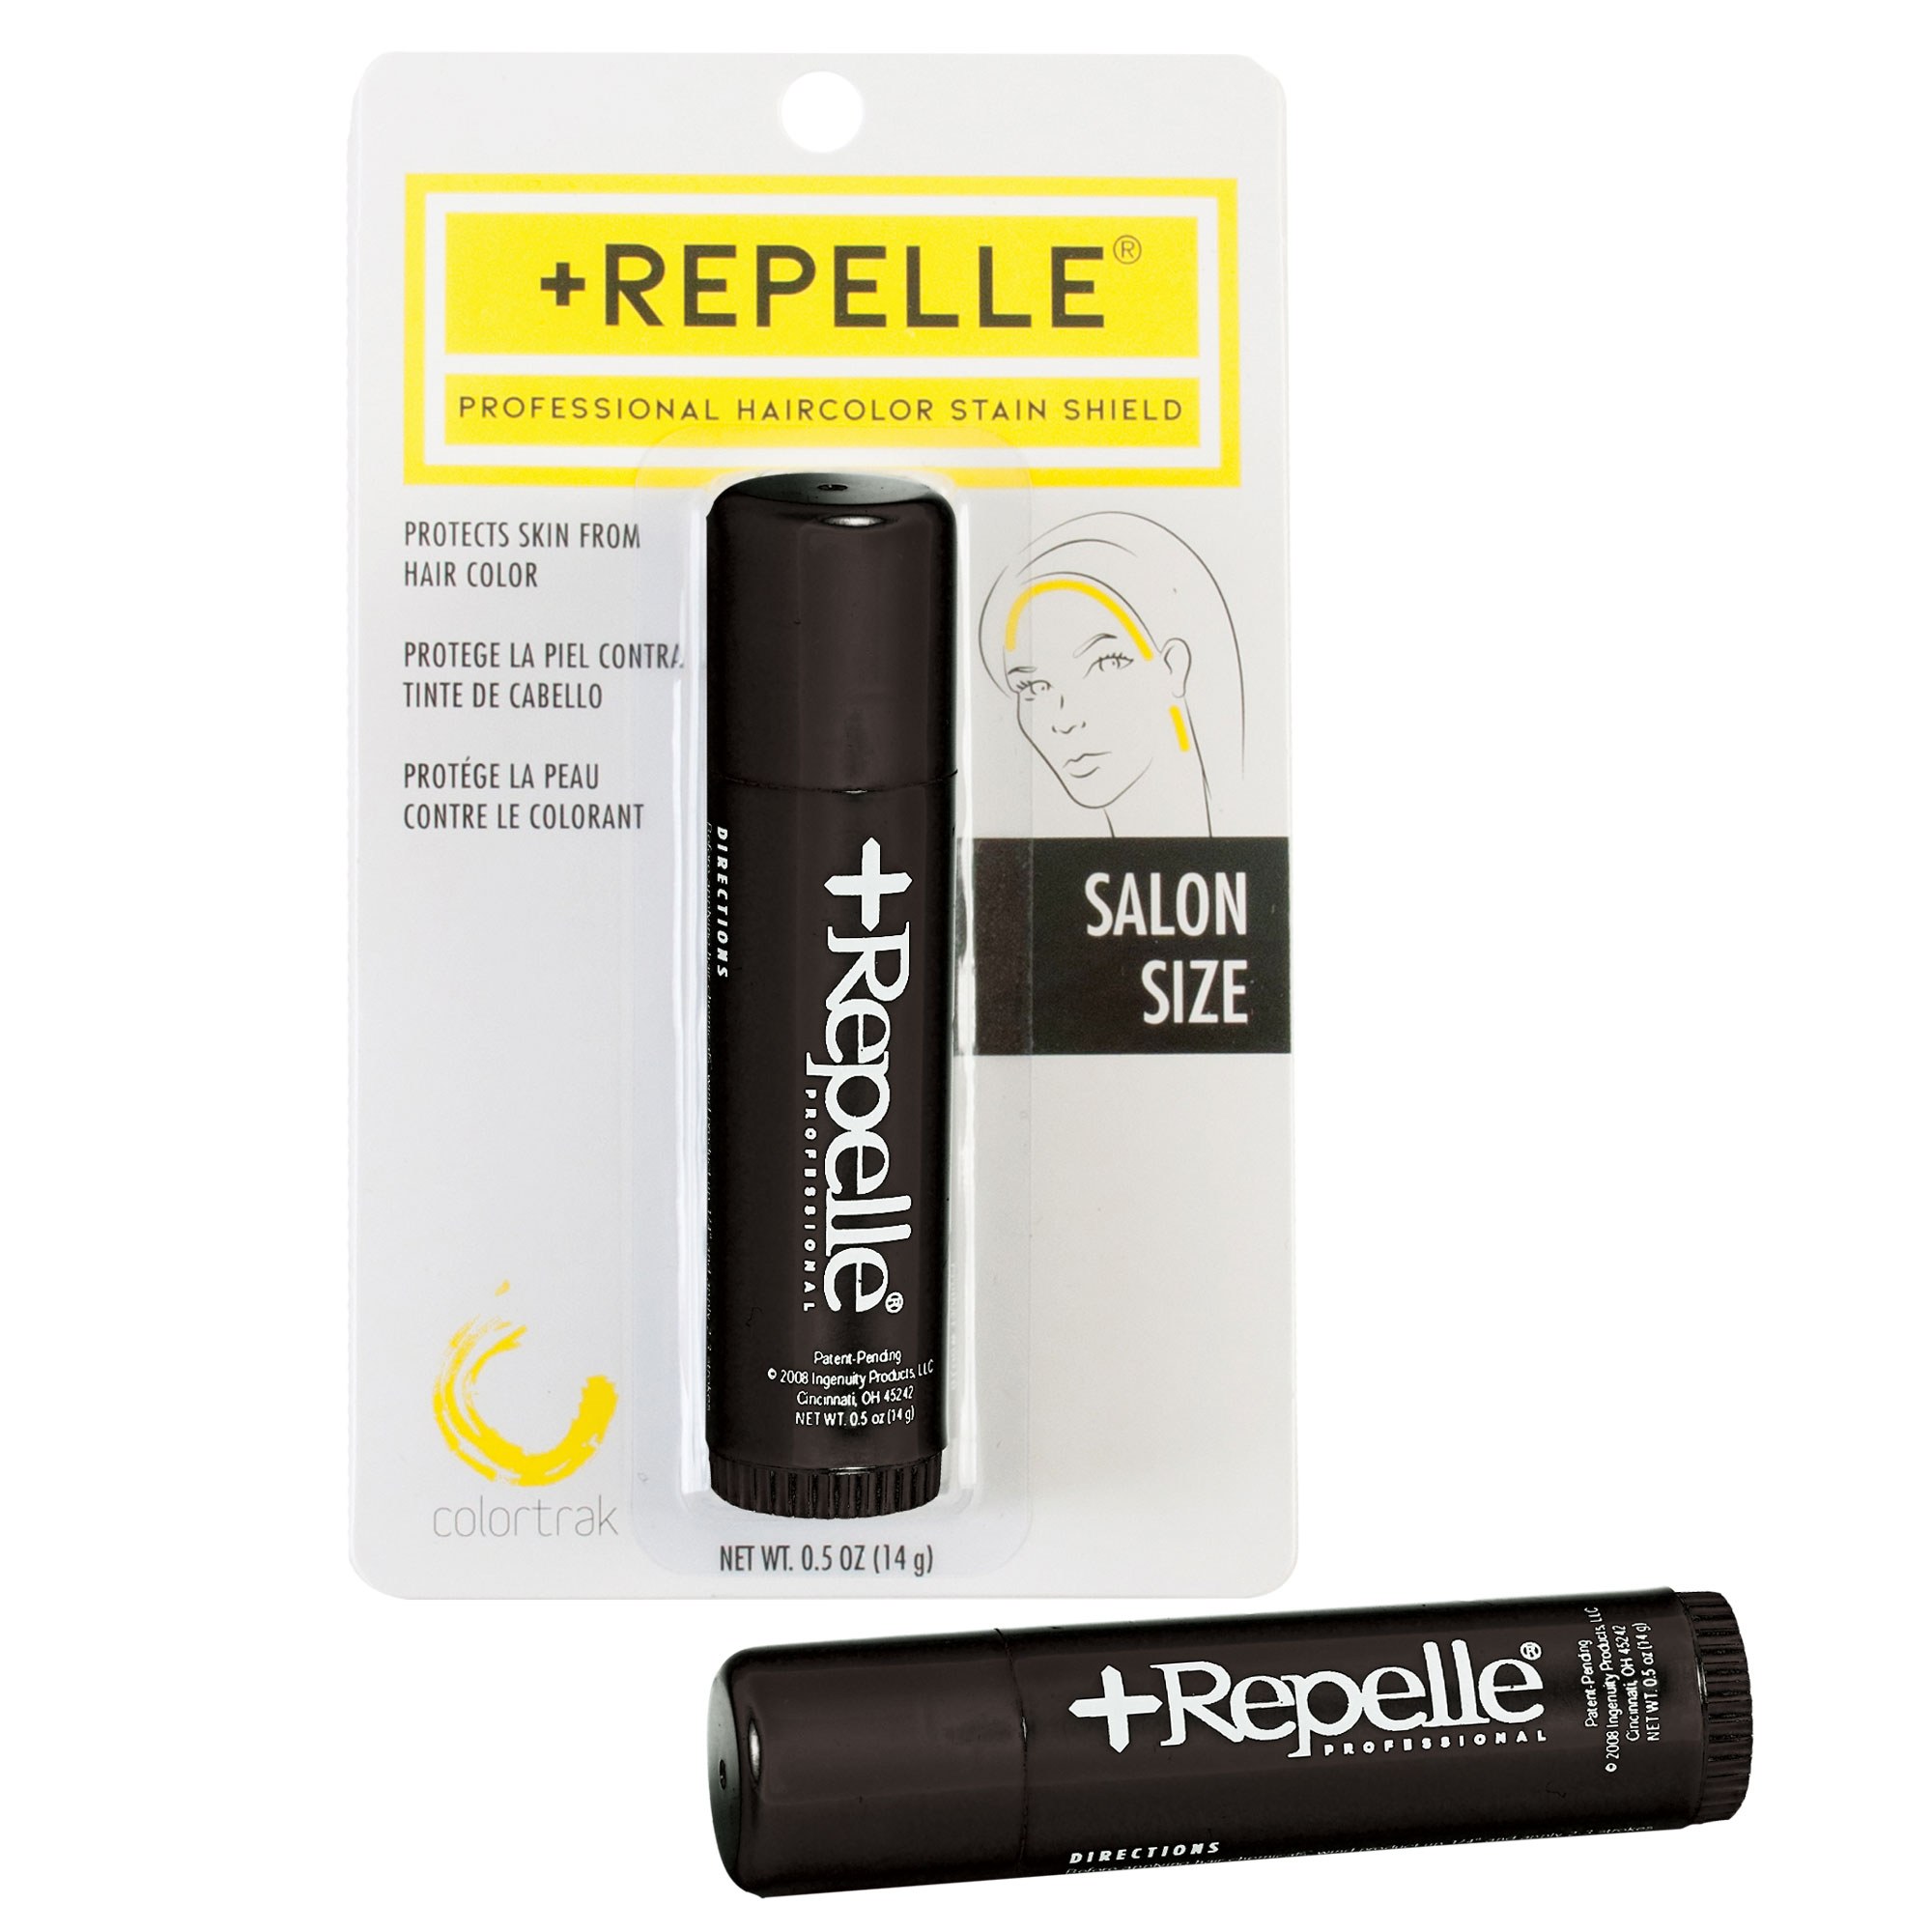 Colortrak Color Tools: Repelle Hair Color Stain Shield - 1 item